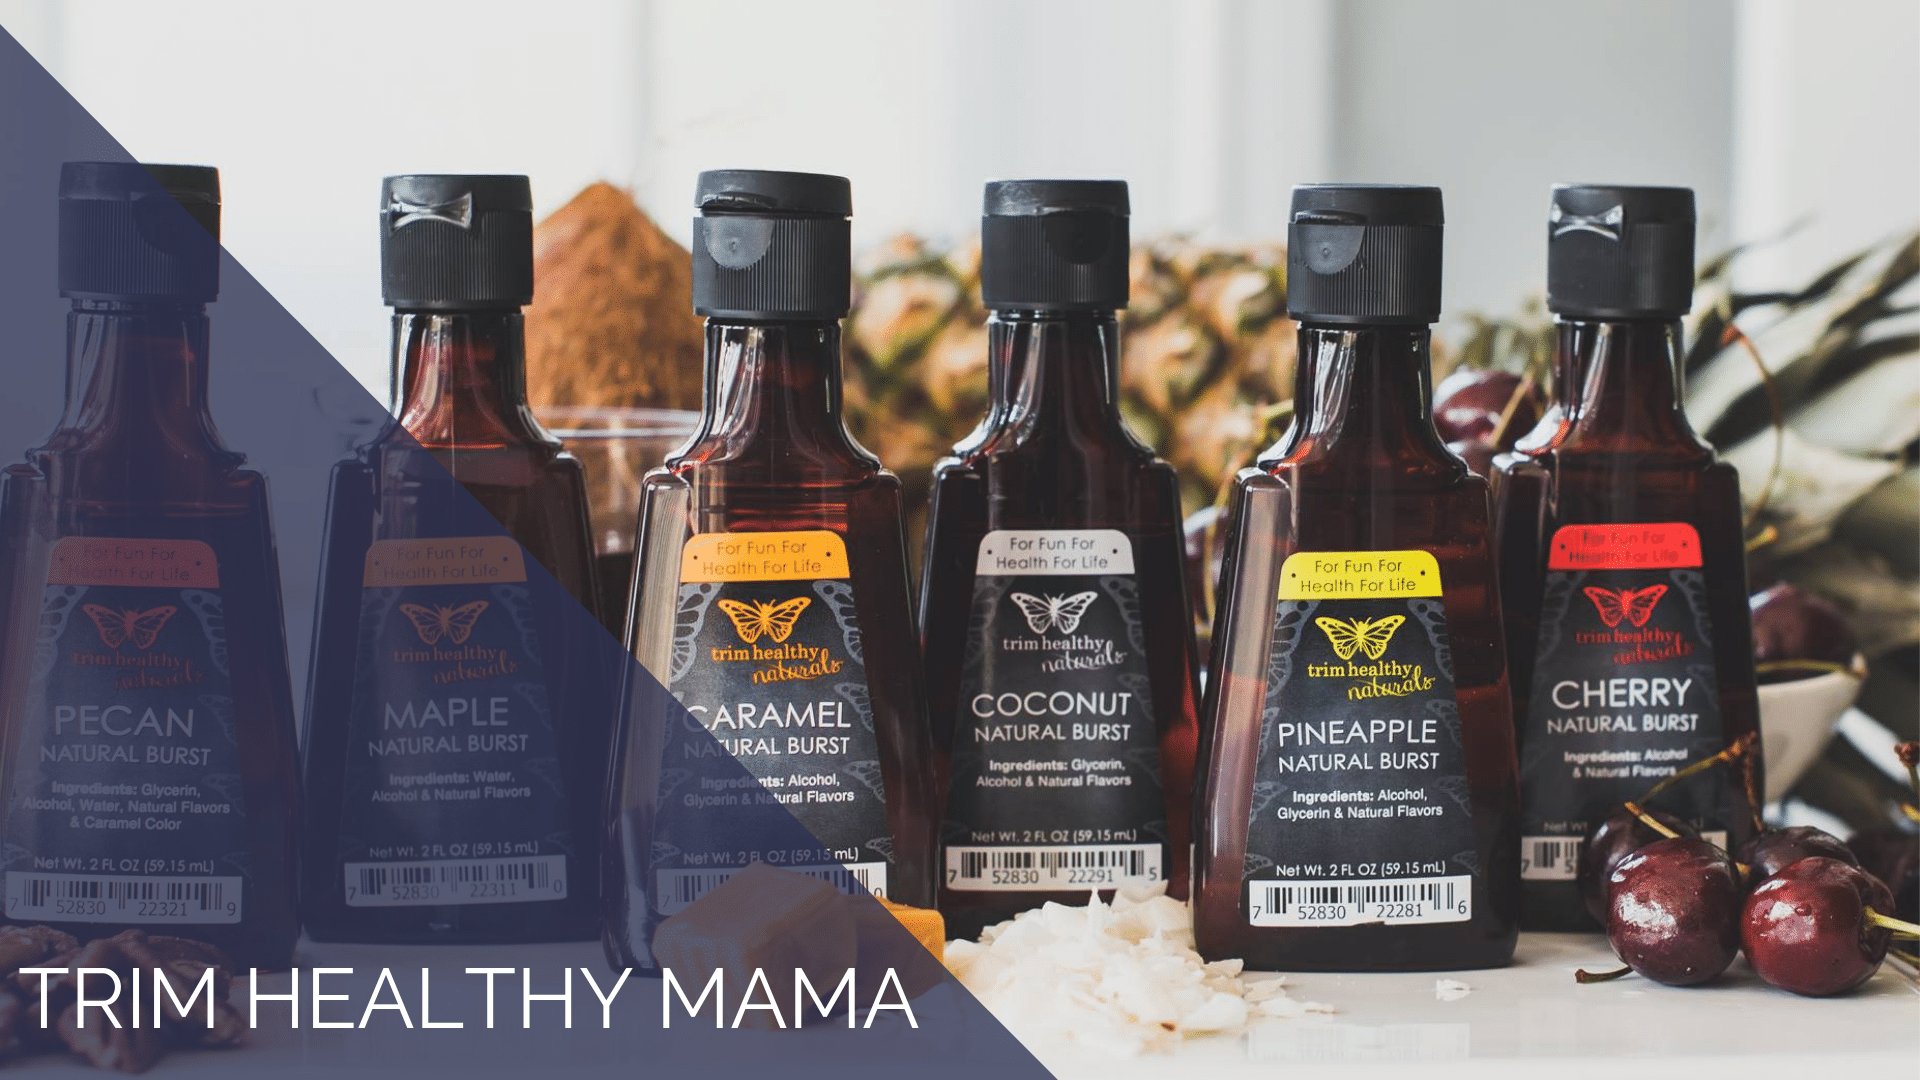 Tim Healthy Mama products case study